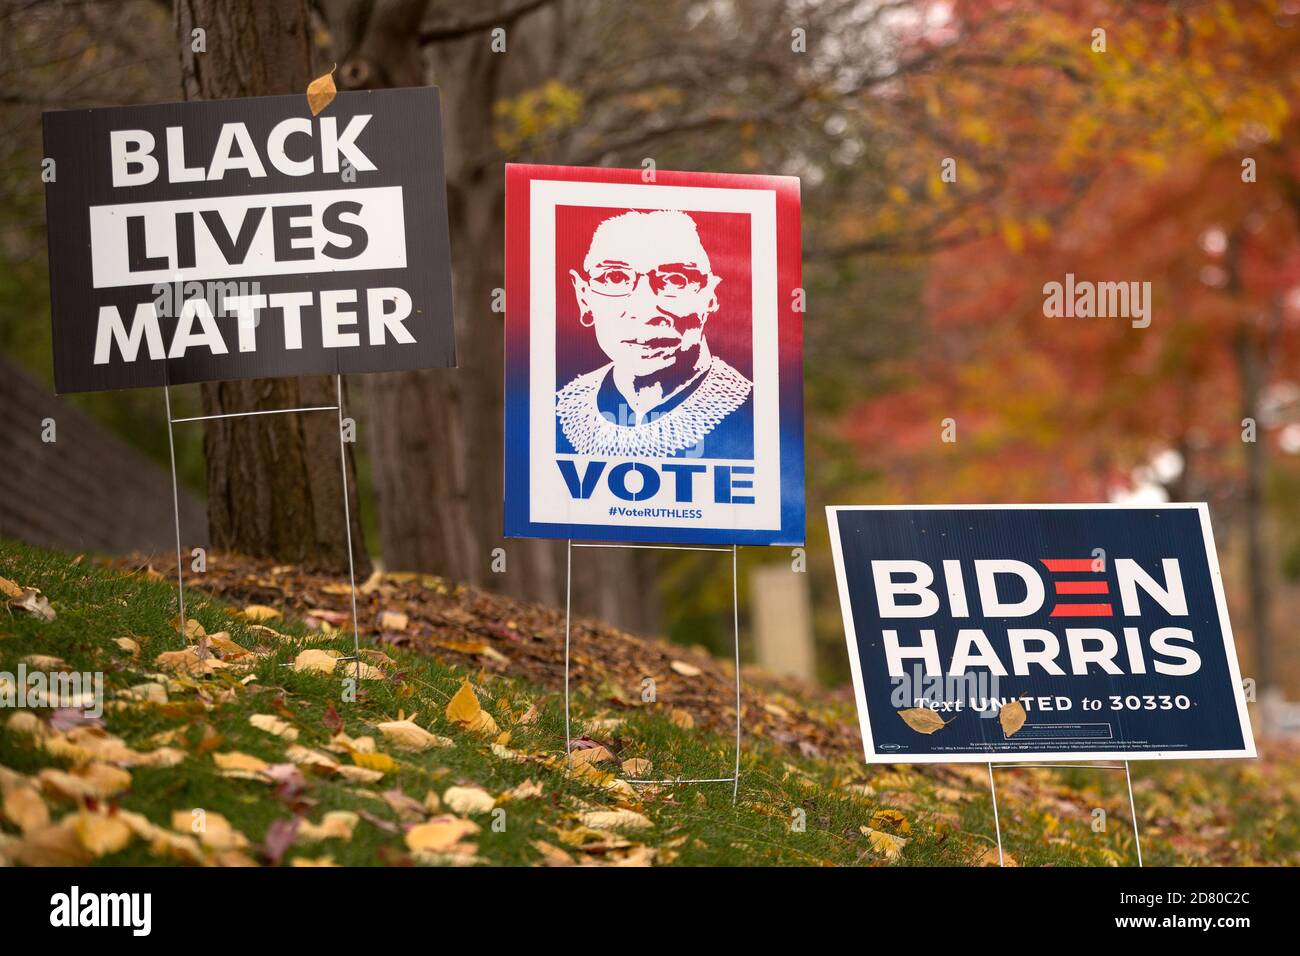 2020 yard signs Black Lives Matter, portrait of Ruth Bader Ginsburg with the words Vote and #VoteRUTHLESS, Joe Biden presidential election Stock Photo